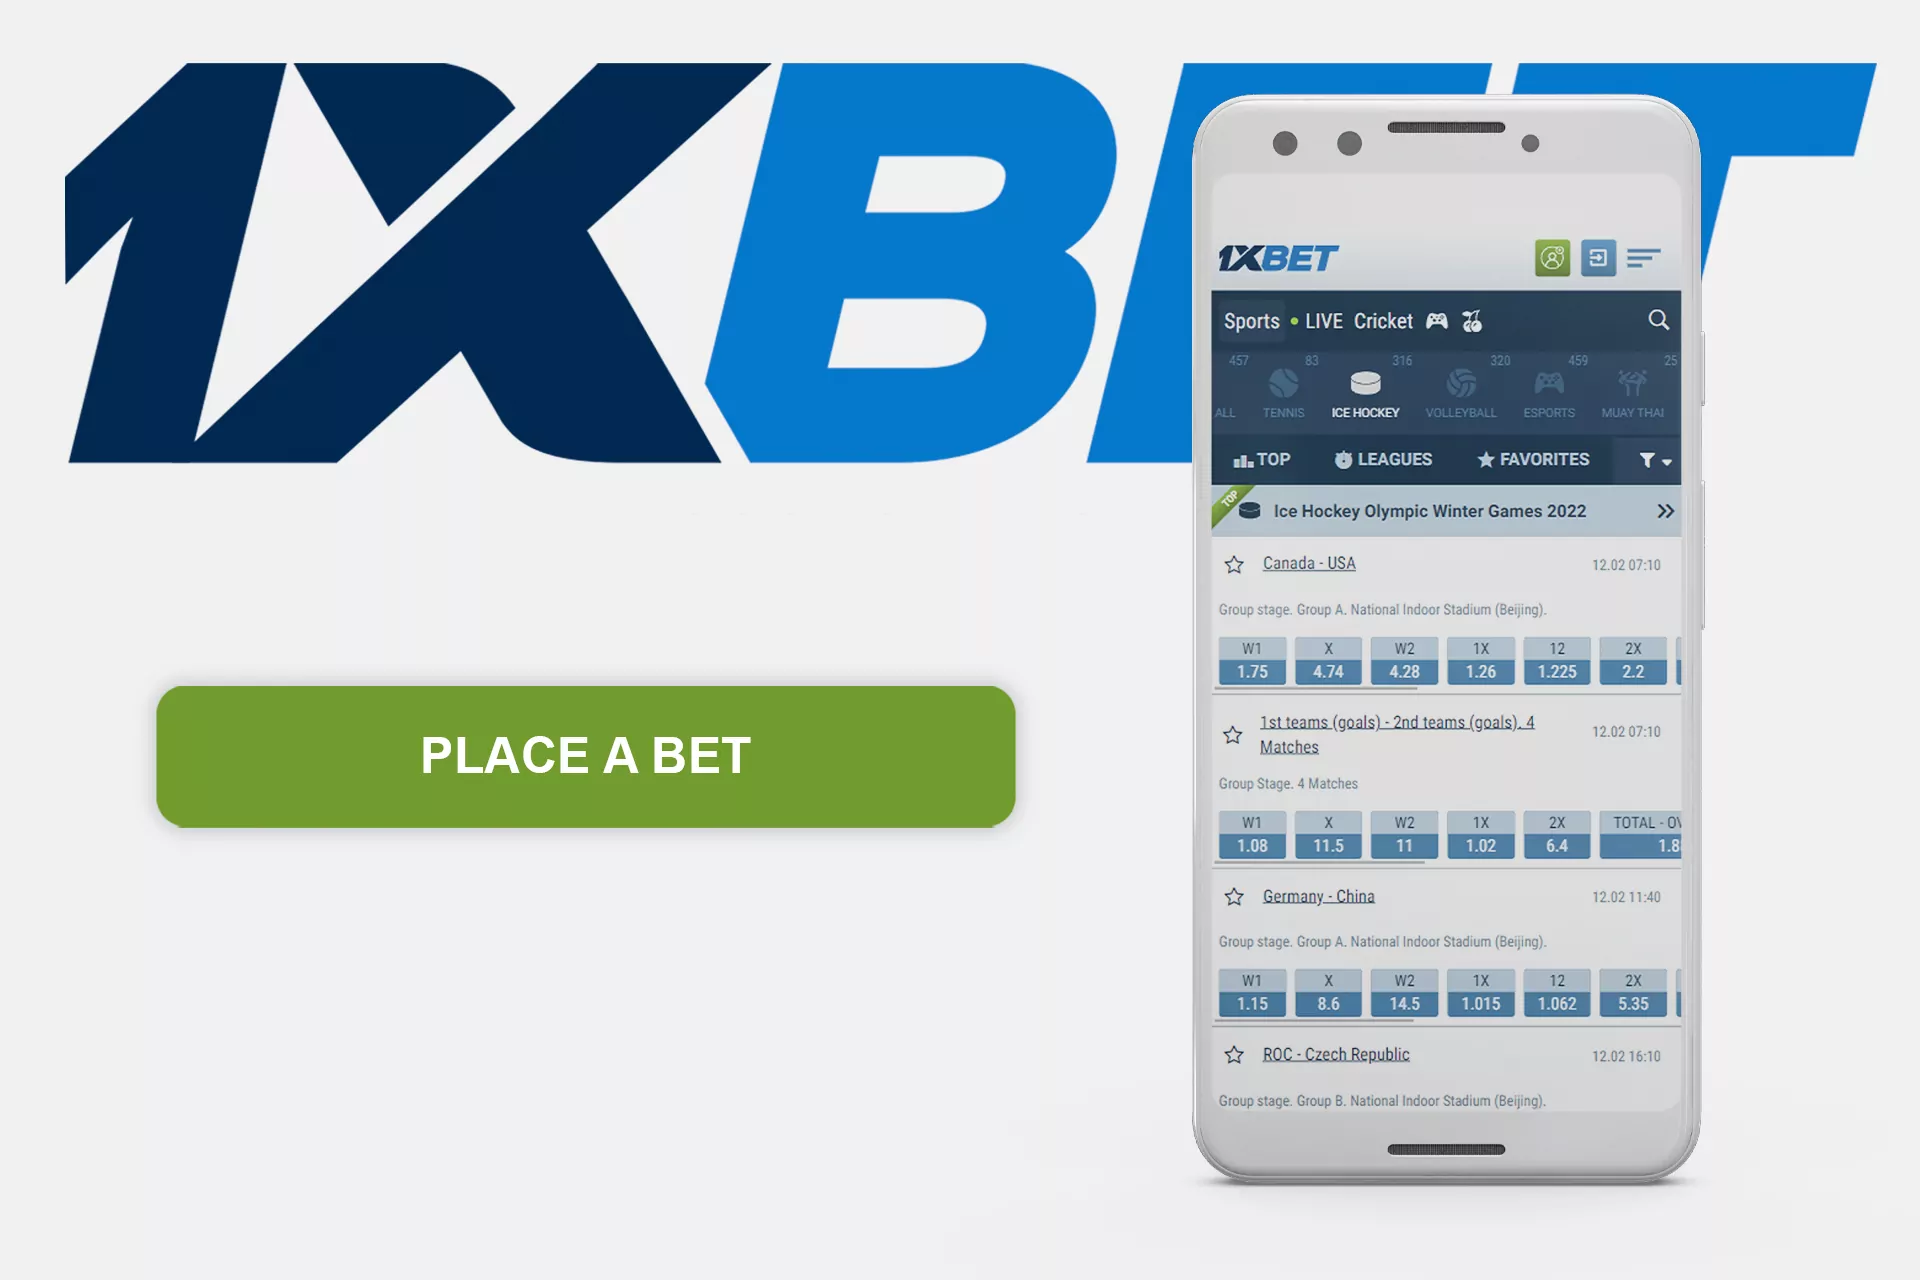 You have the same betting possibilities in the 1xBet app.